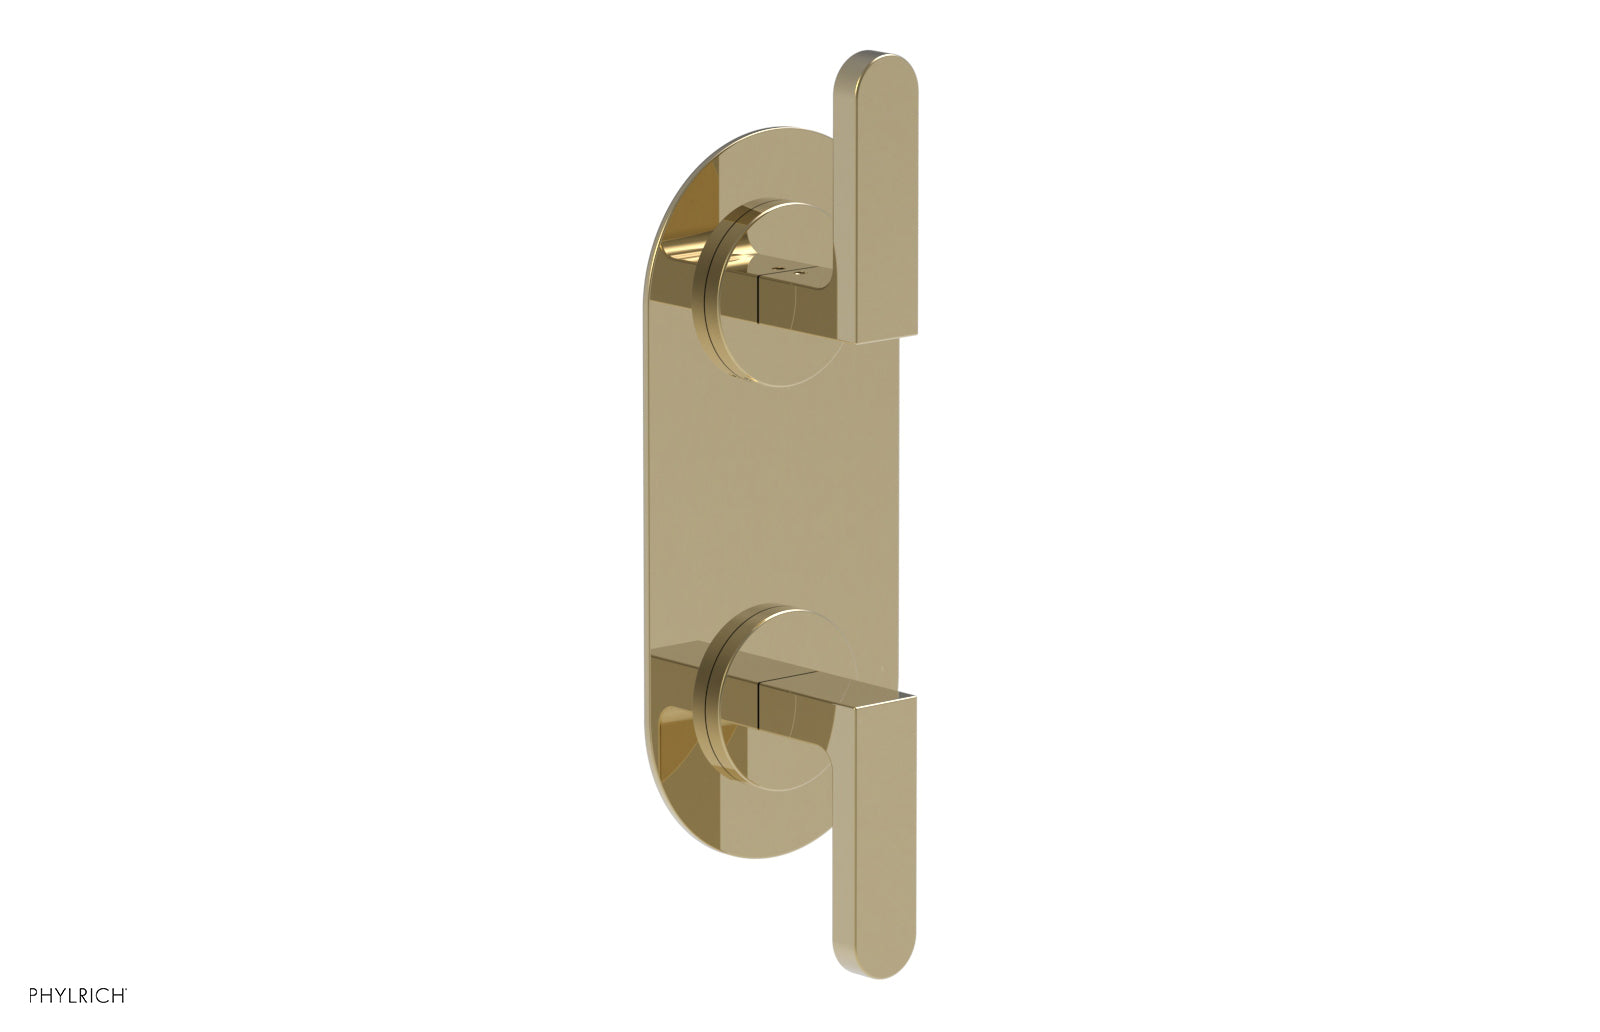 Phylrich ROND 3/4" Thermostatic Valve with Volume Control or Diverter, Lever Handles